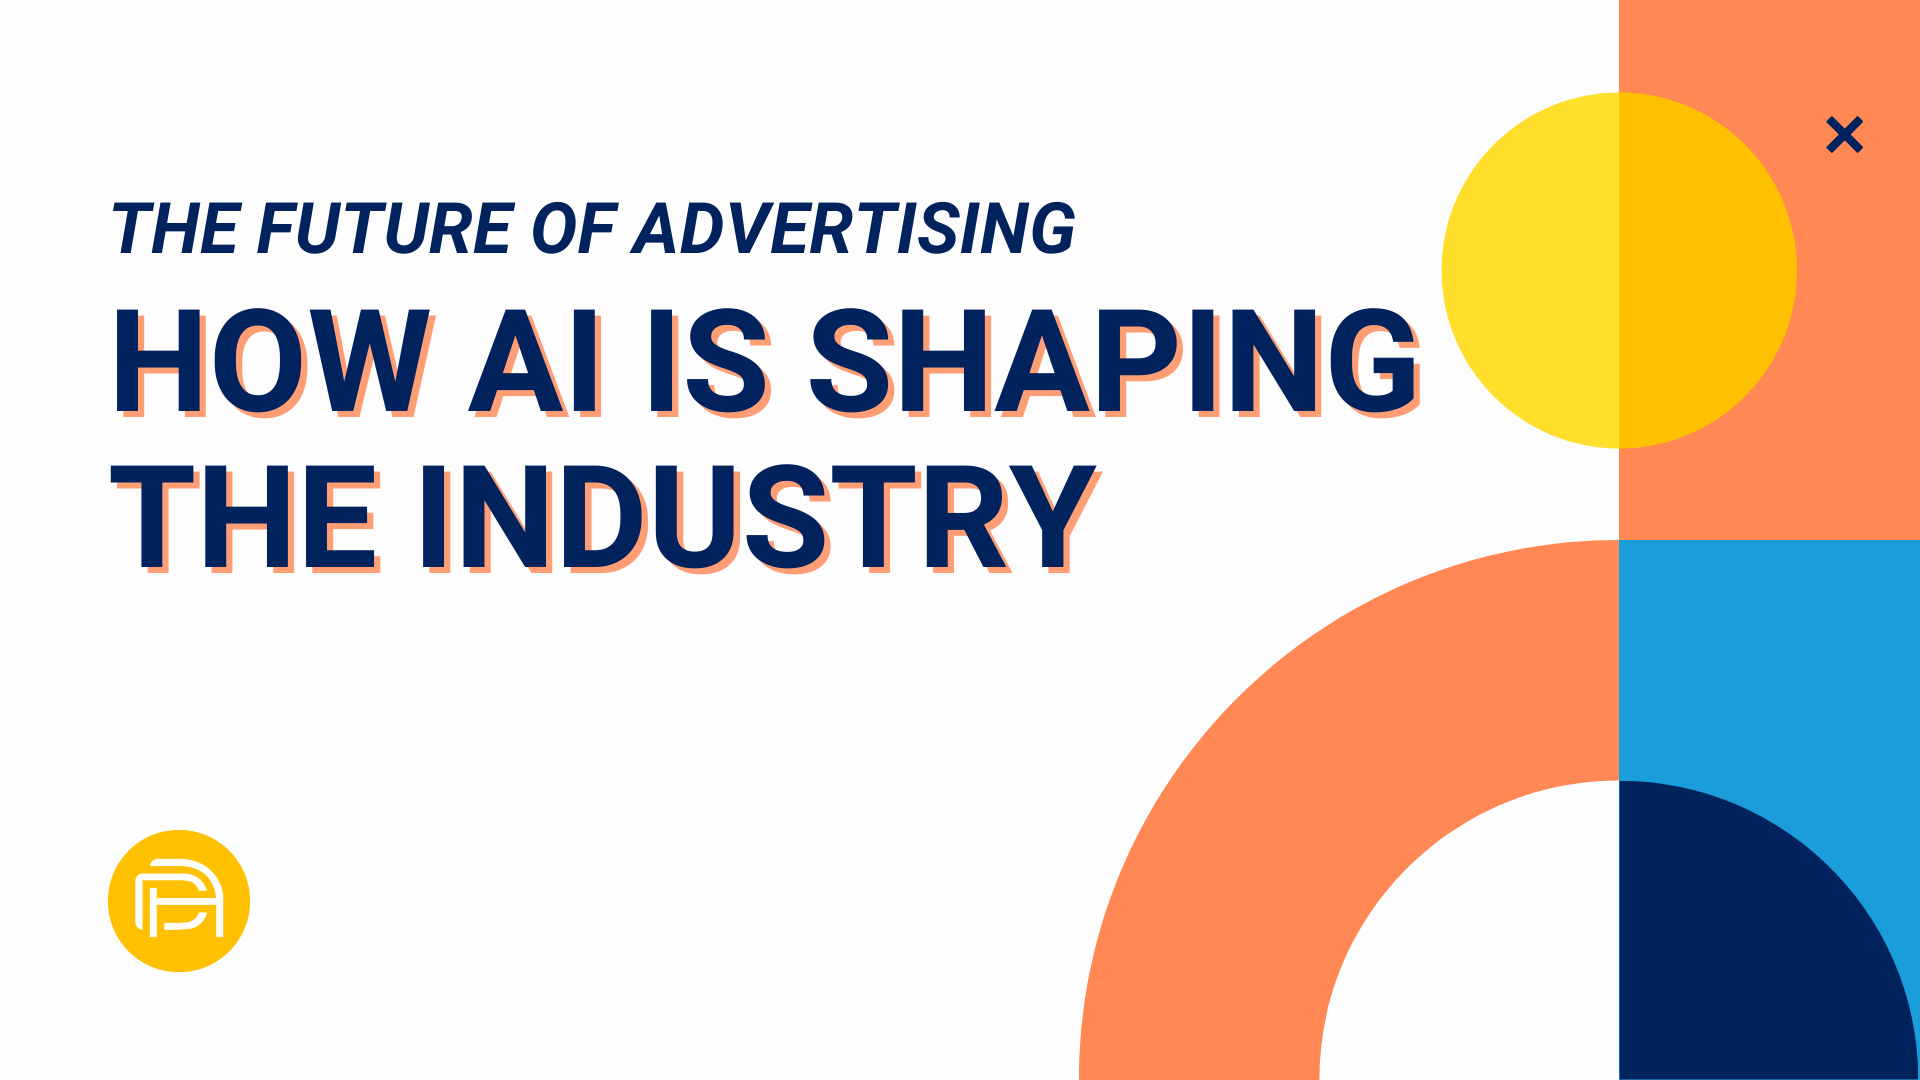 The Future of Advertising: How AI is Shaping the Industry